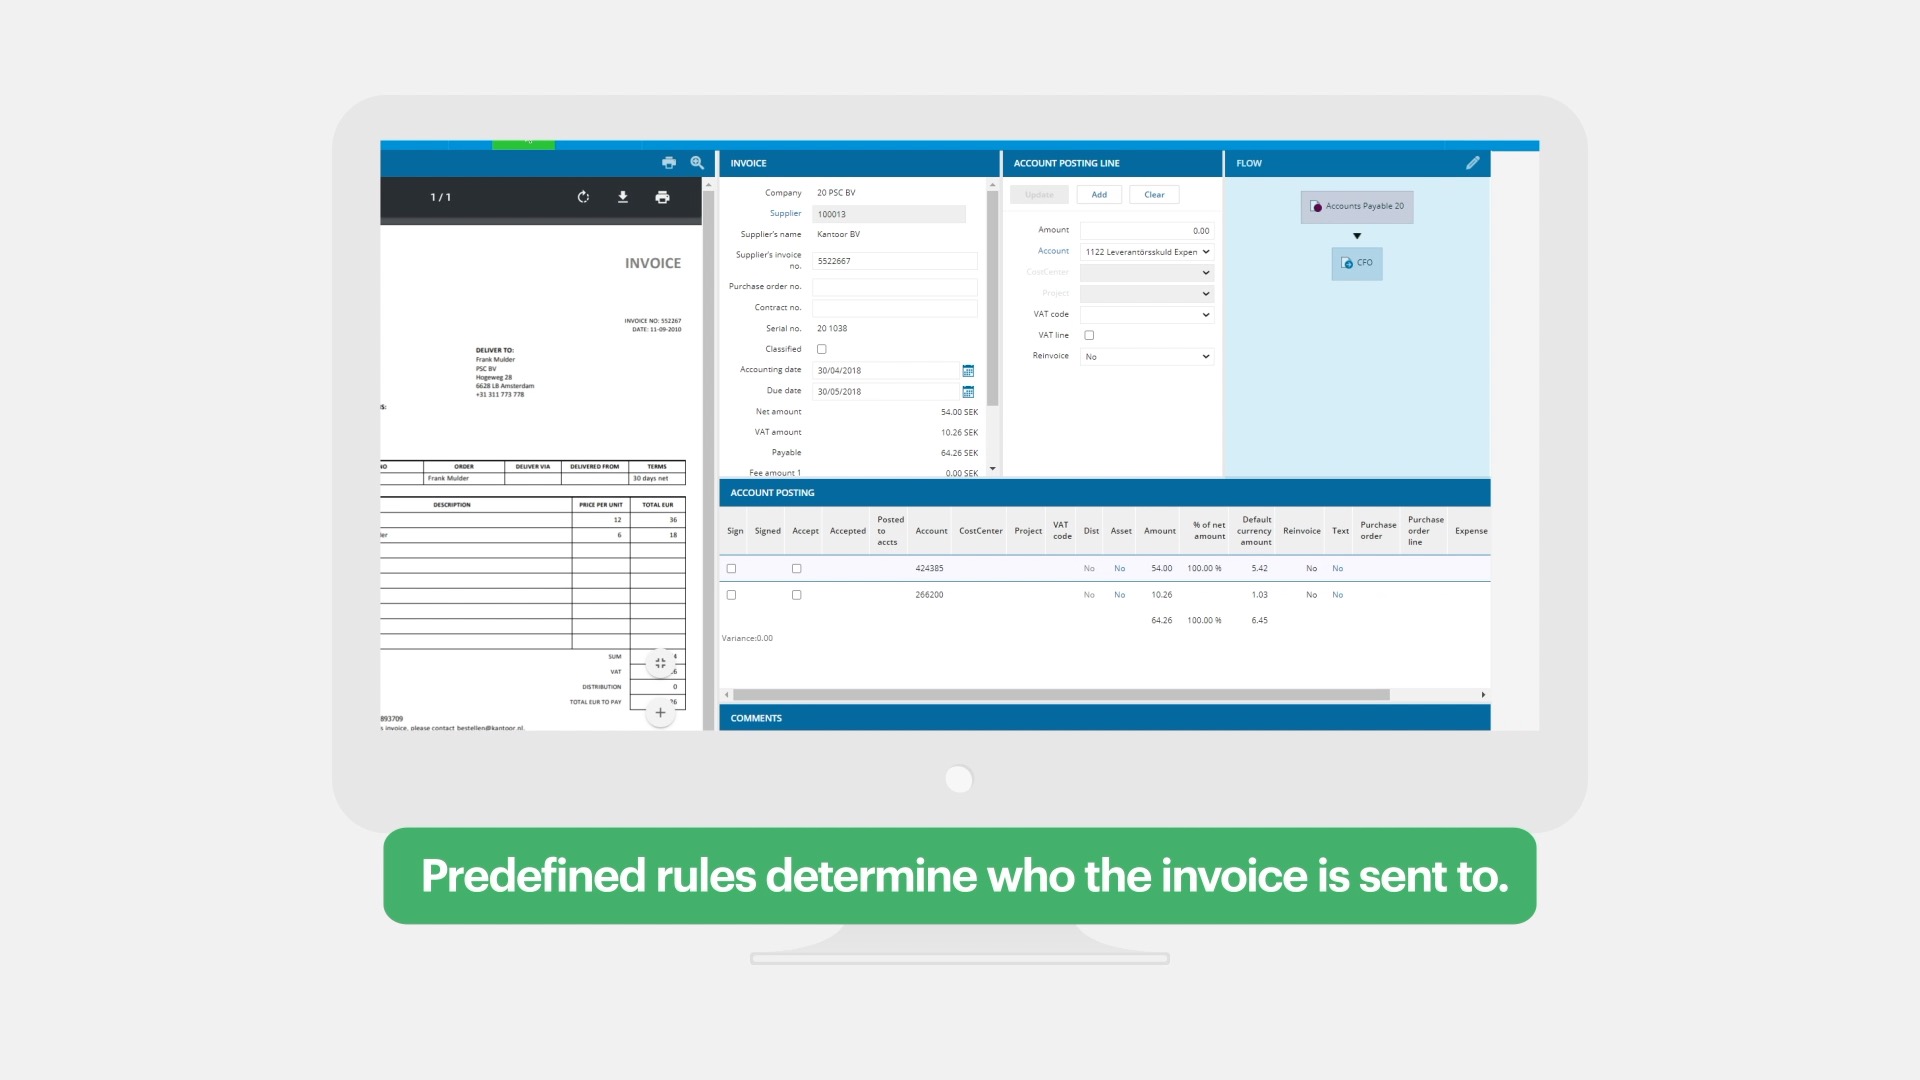 Predefined rules determine who the invoice is sent to